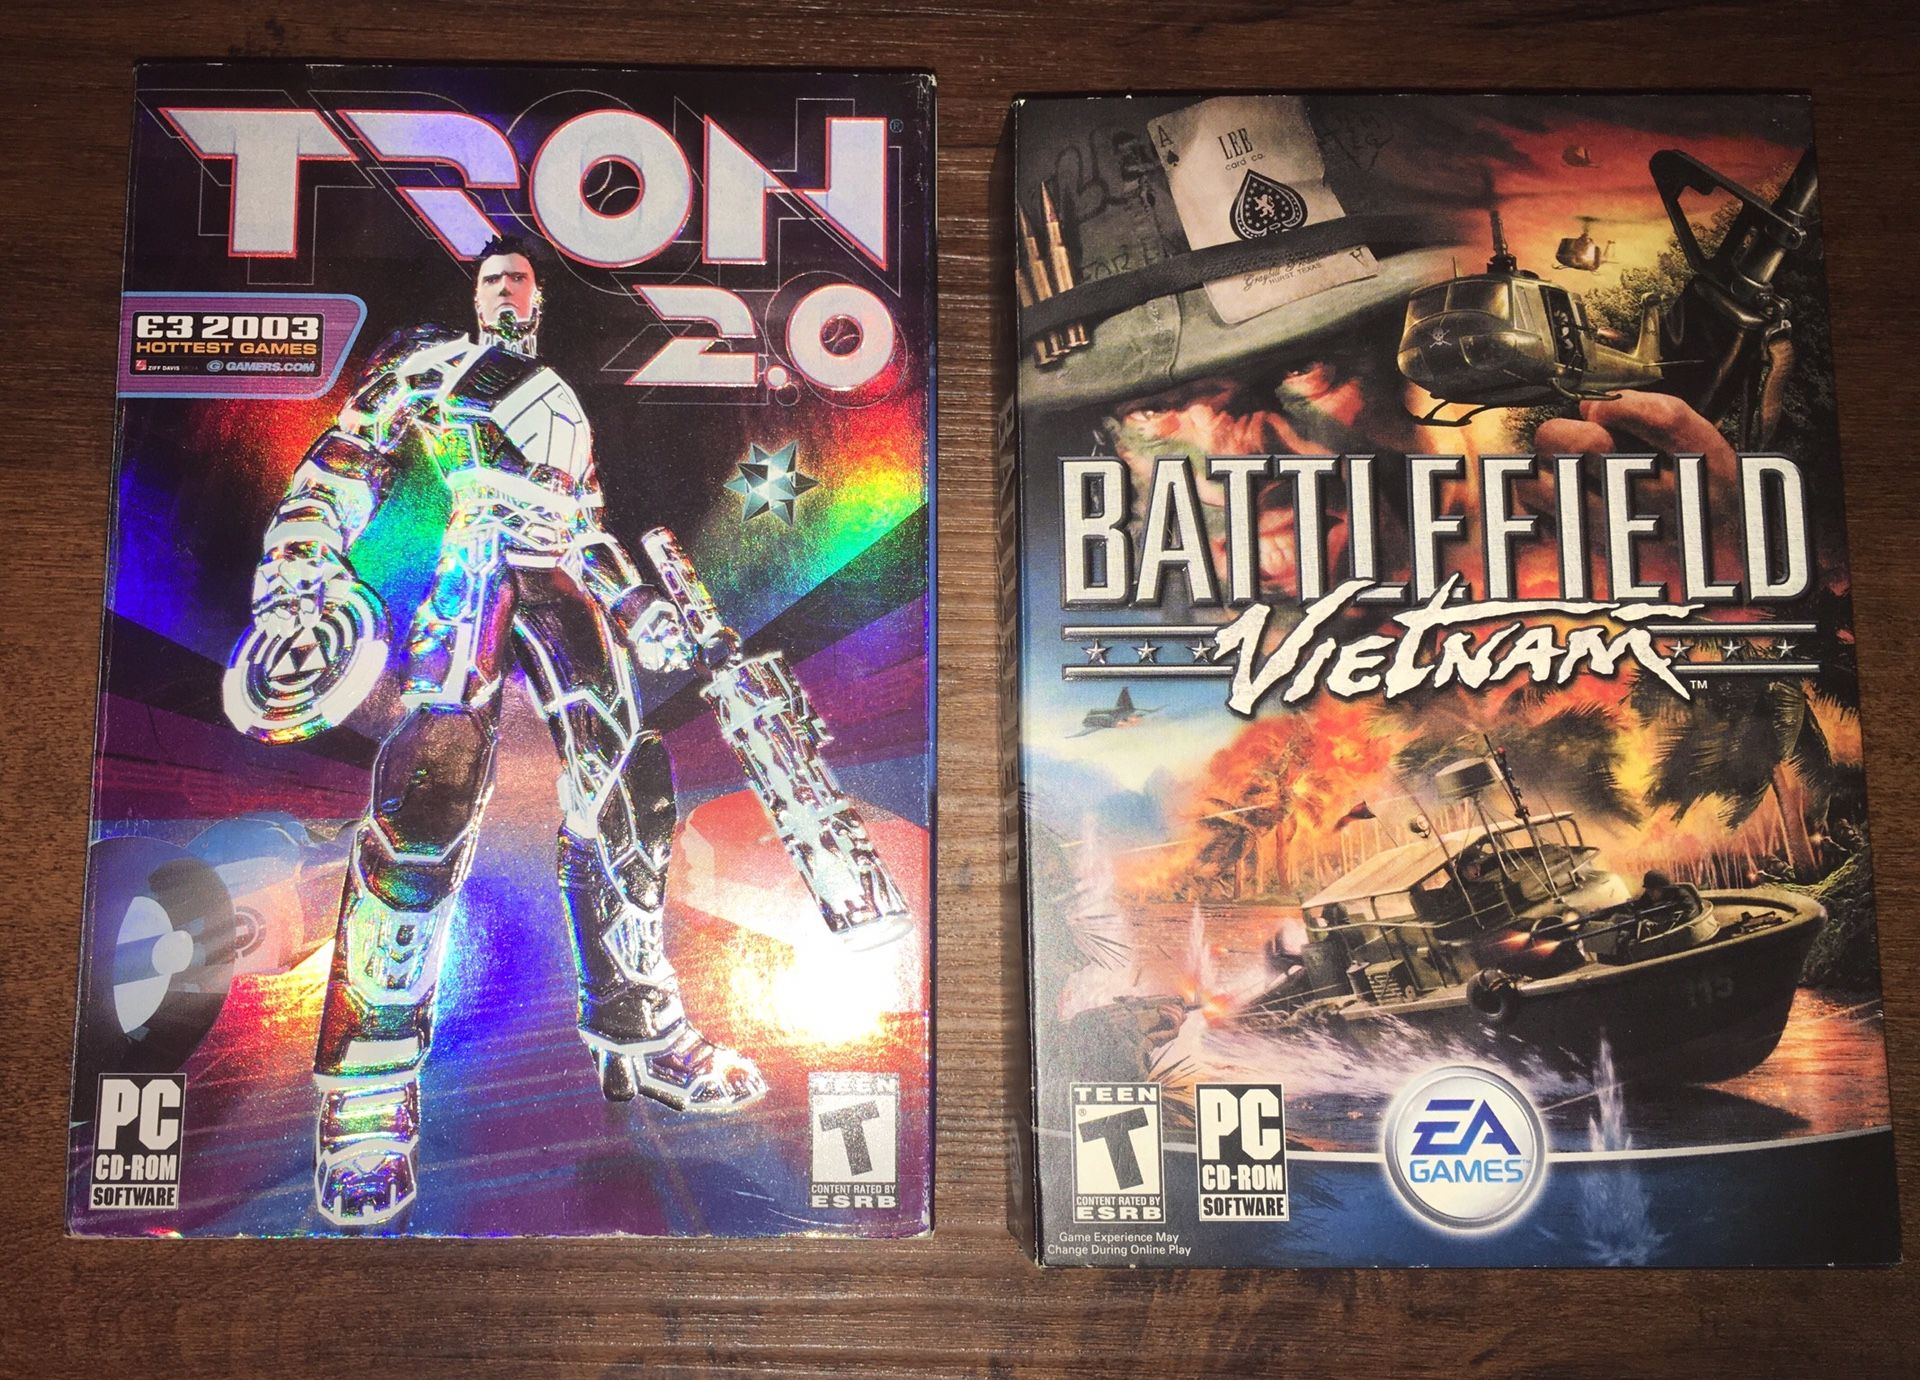 Boxes and inserts only for the pc games Tron 2.0 and Battlefield Vietnam